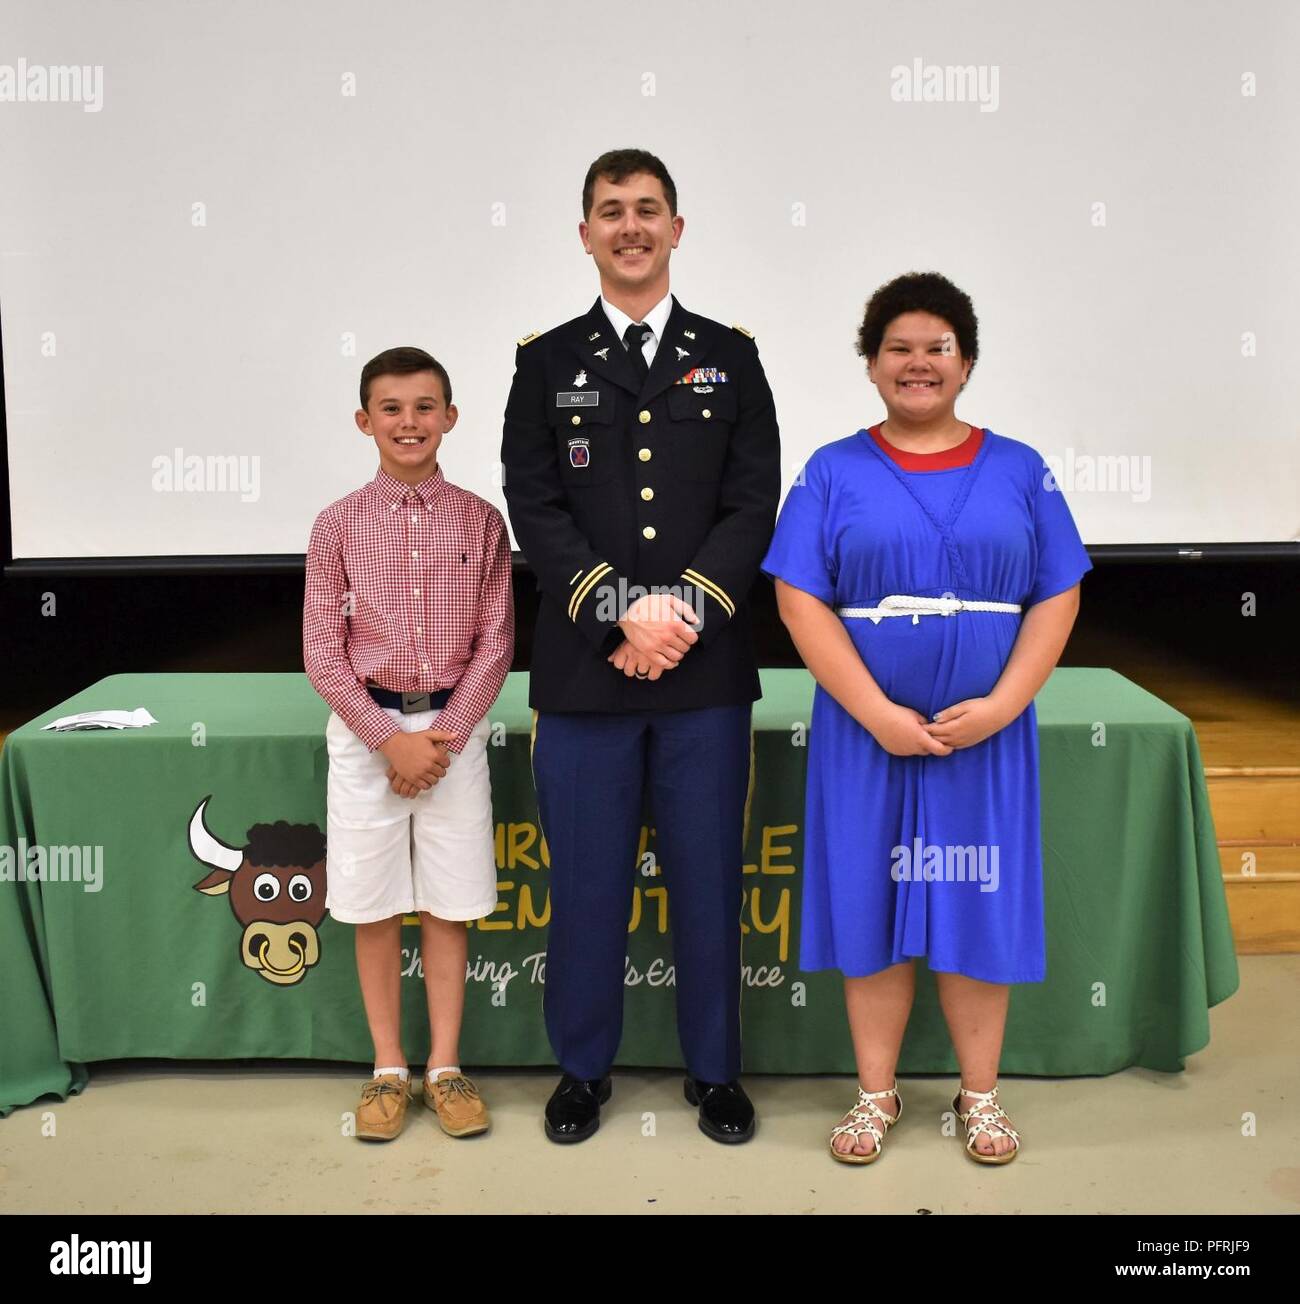 Capt. Thornton Ray, the operations officer (S-3) for the 1st Area Medical Laboratory, 20th Chemical, Biological, Radiological, Nuclear, Explosives (CBRNE) Command, poses for a photo with fifth graders Alicia Pembroke and Jack Geyer after his speech at the annual Churchville Elementary School Fifth Grade Patriot Assembly on Thursday, May 24. Pembroke and Geyer completed the Patriot Program by meeting all the requirements (see attached article). Pembroke recited the Gettysburg Address and Geyer wrote a Patriot report on Jenny Wade, the only civilian killed during the battle of Gettysburg. Stock Photo